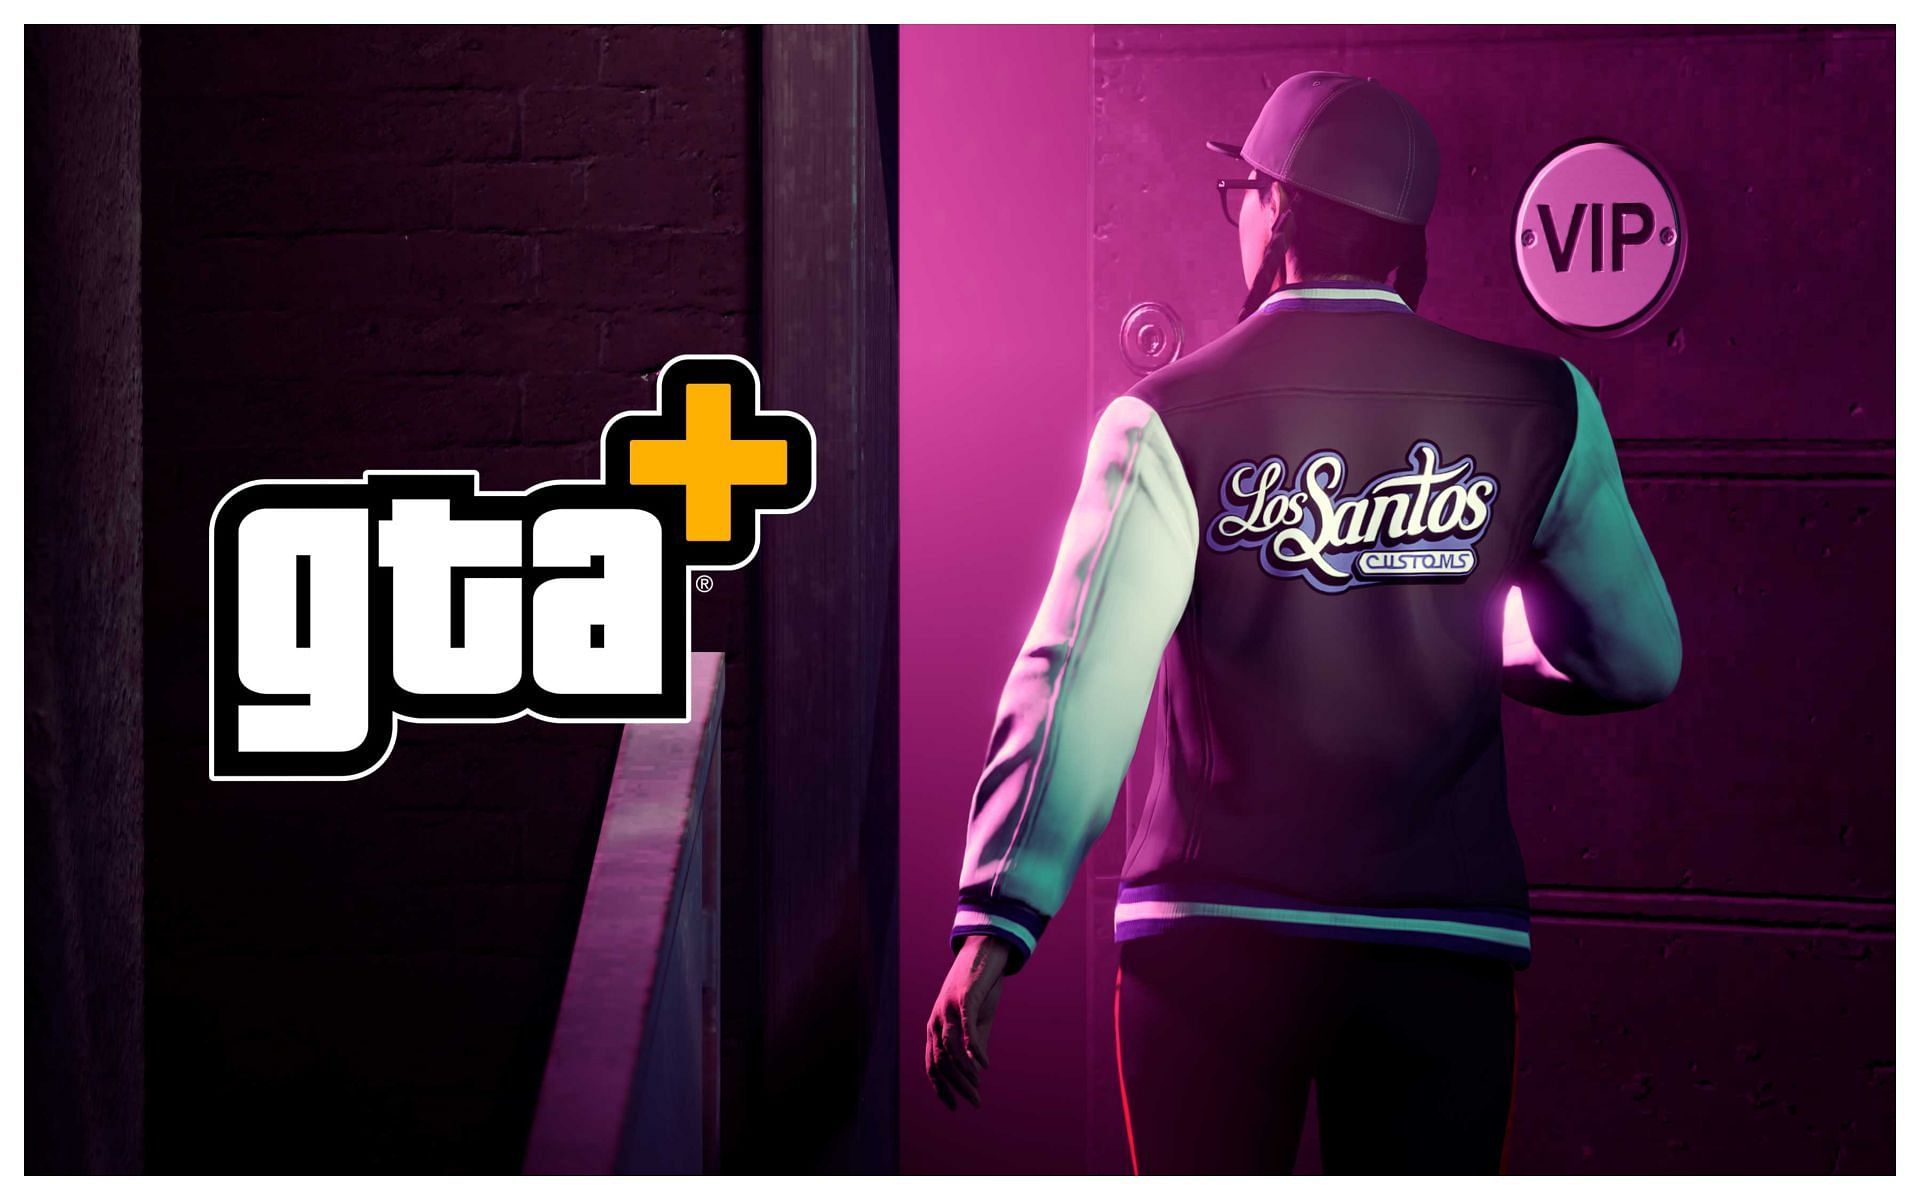 Exclusive content for members only (Images via Rockstar Games)